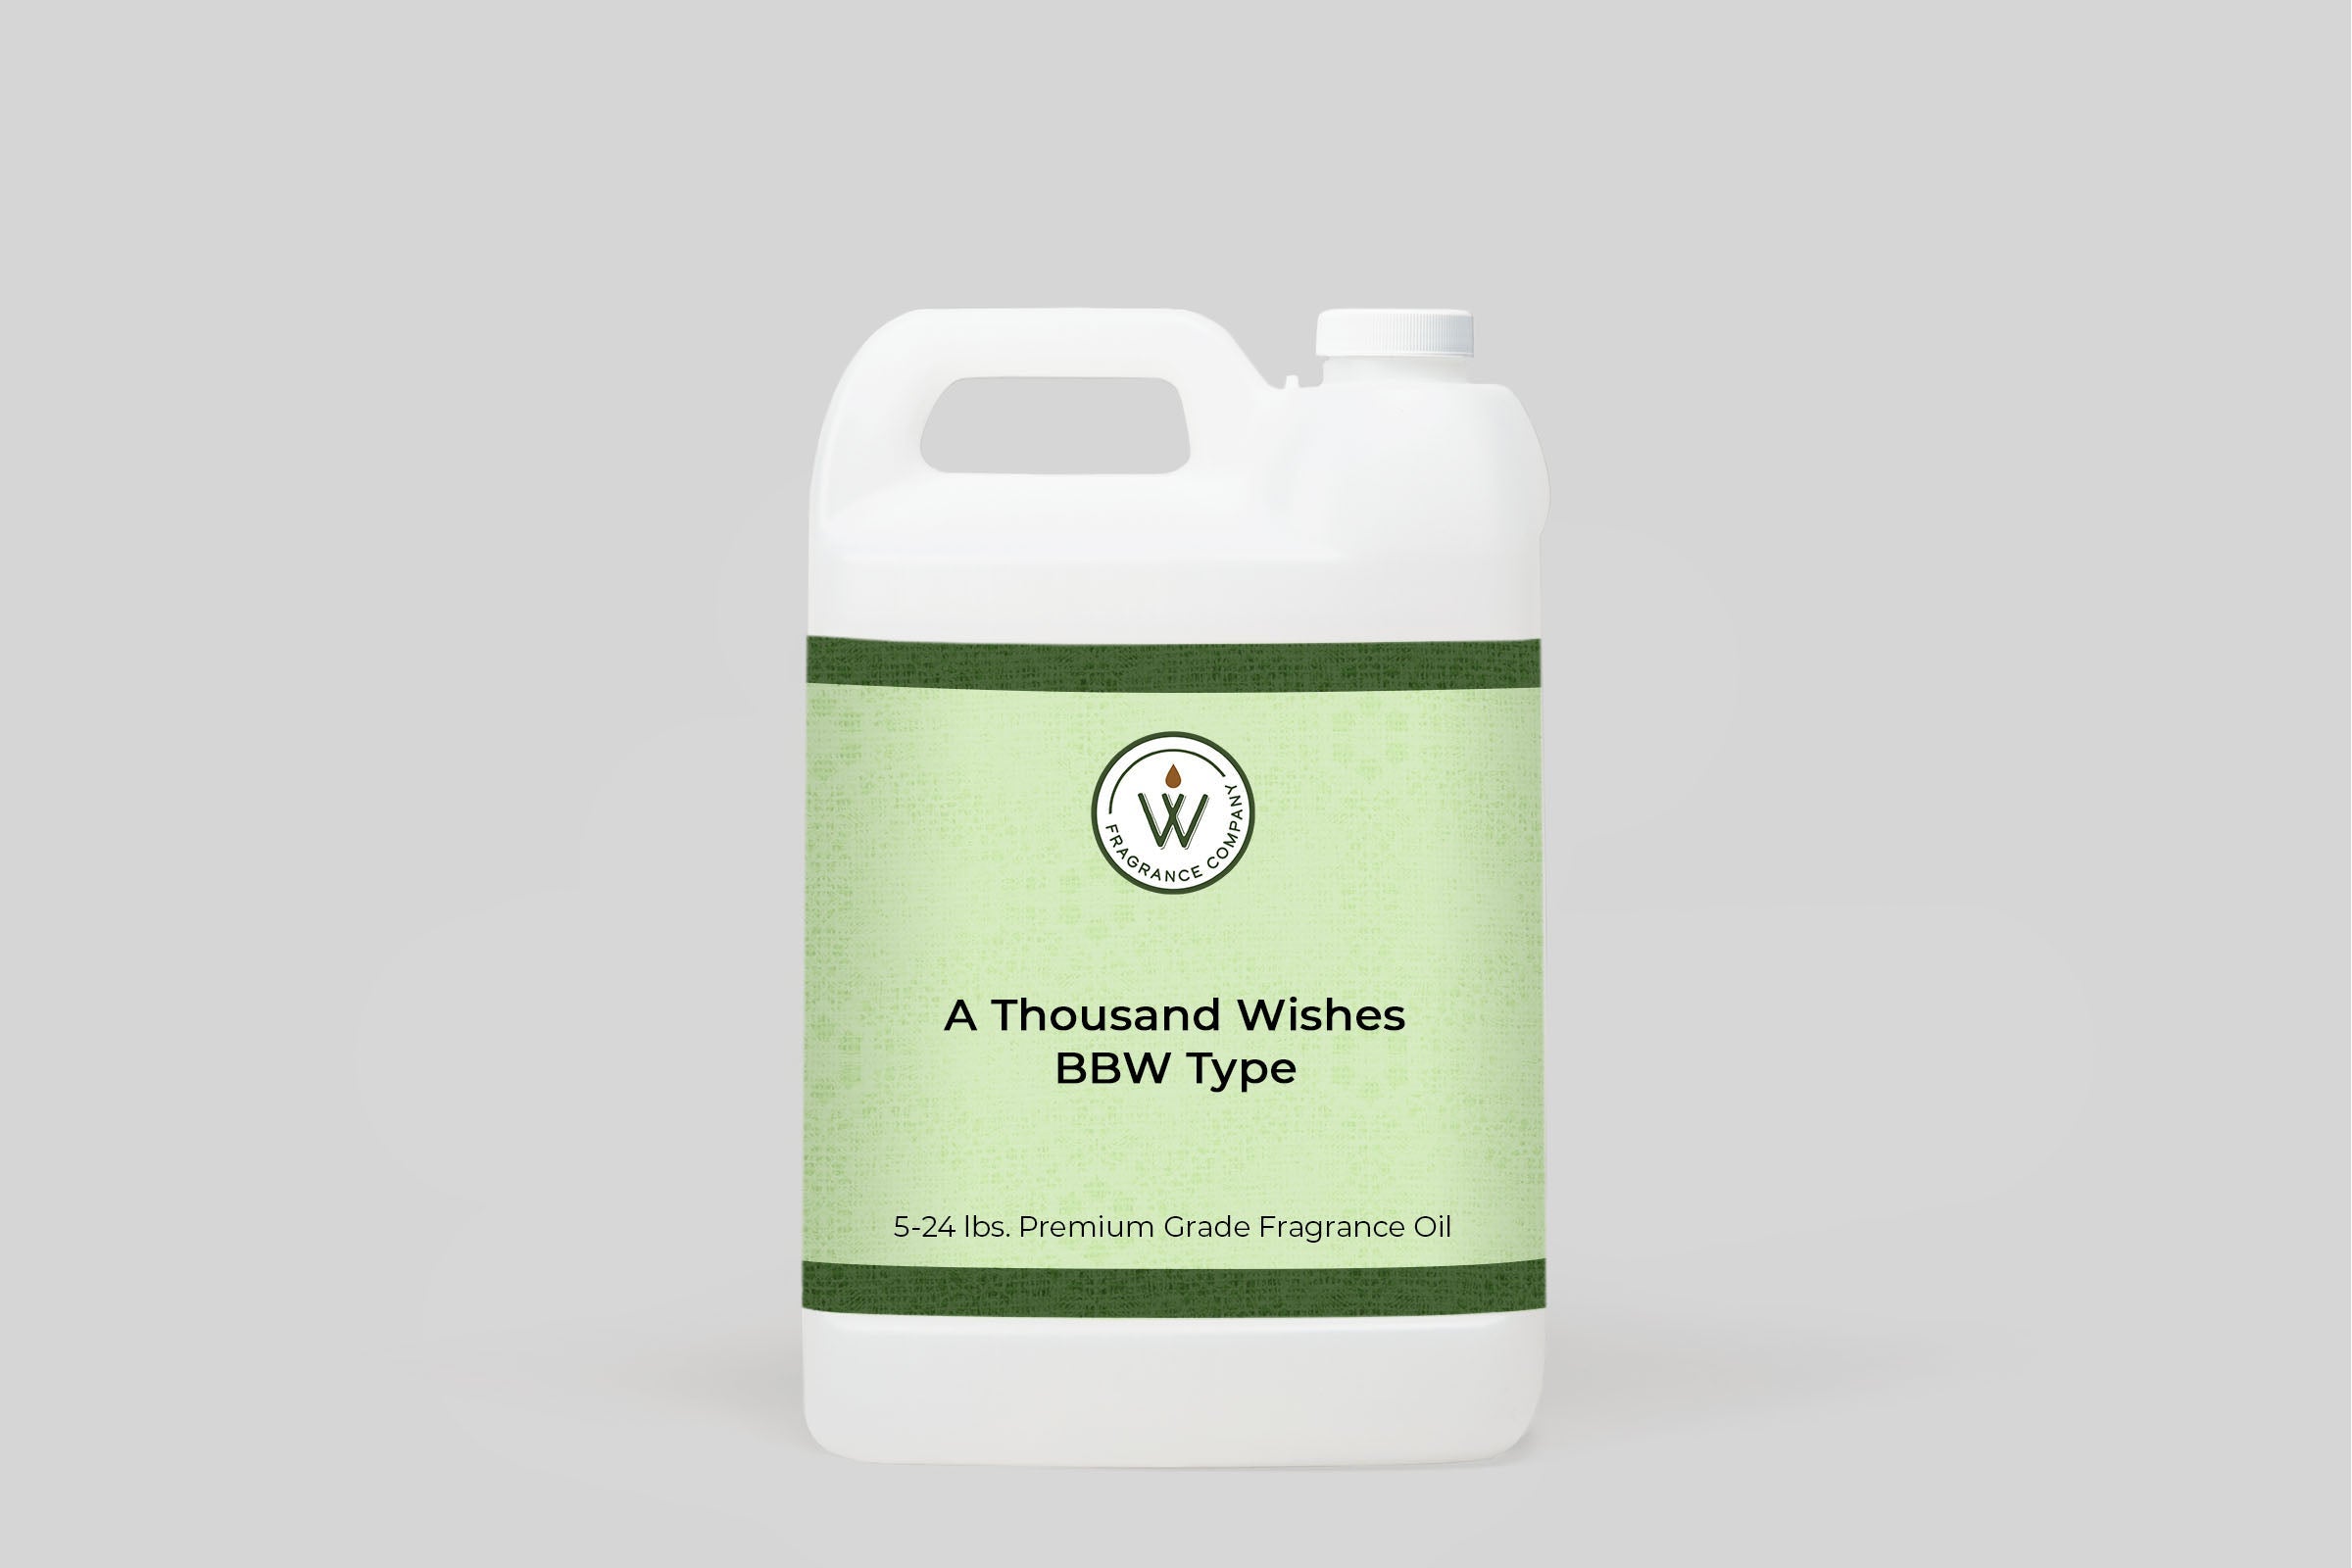 A Thousand Wishes BBW Type Fragrance Oil